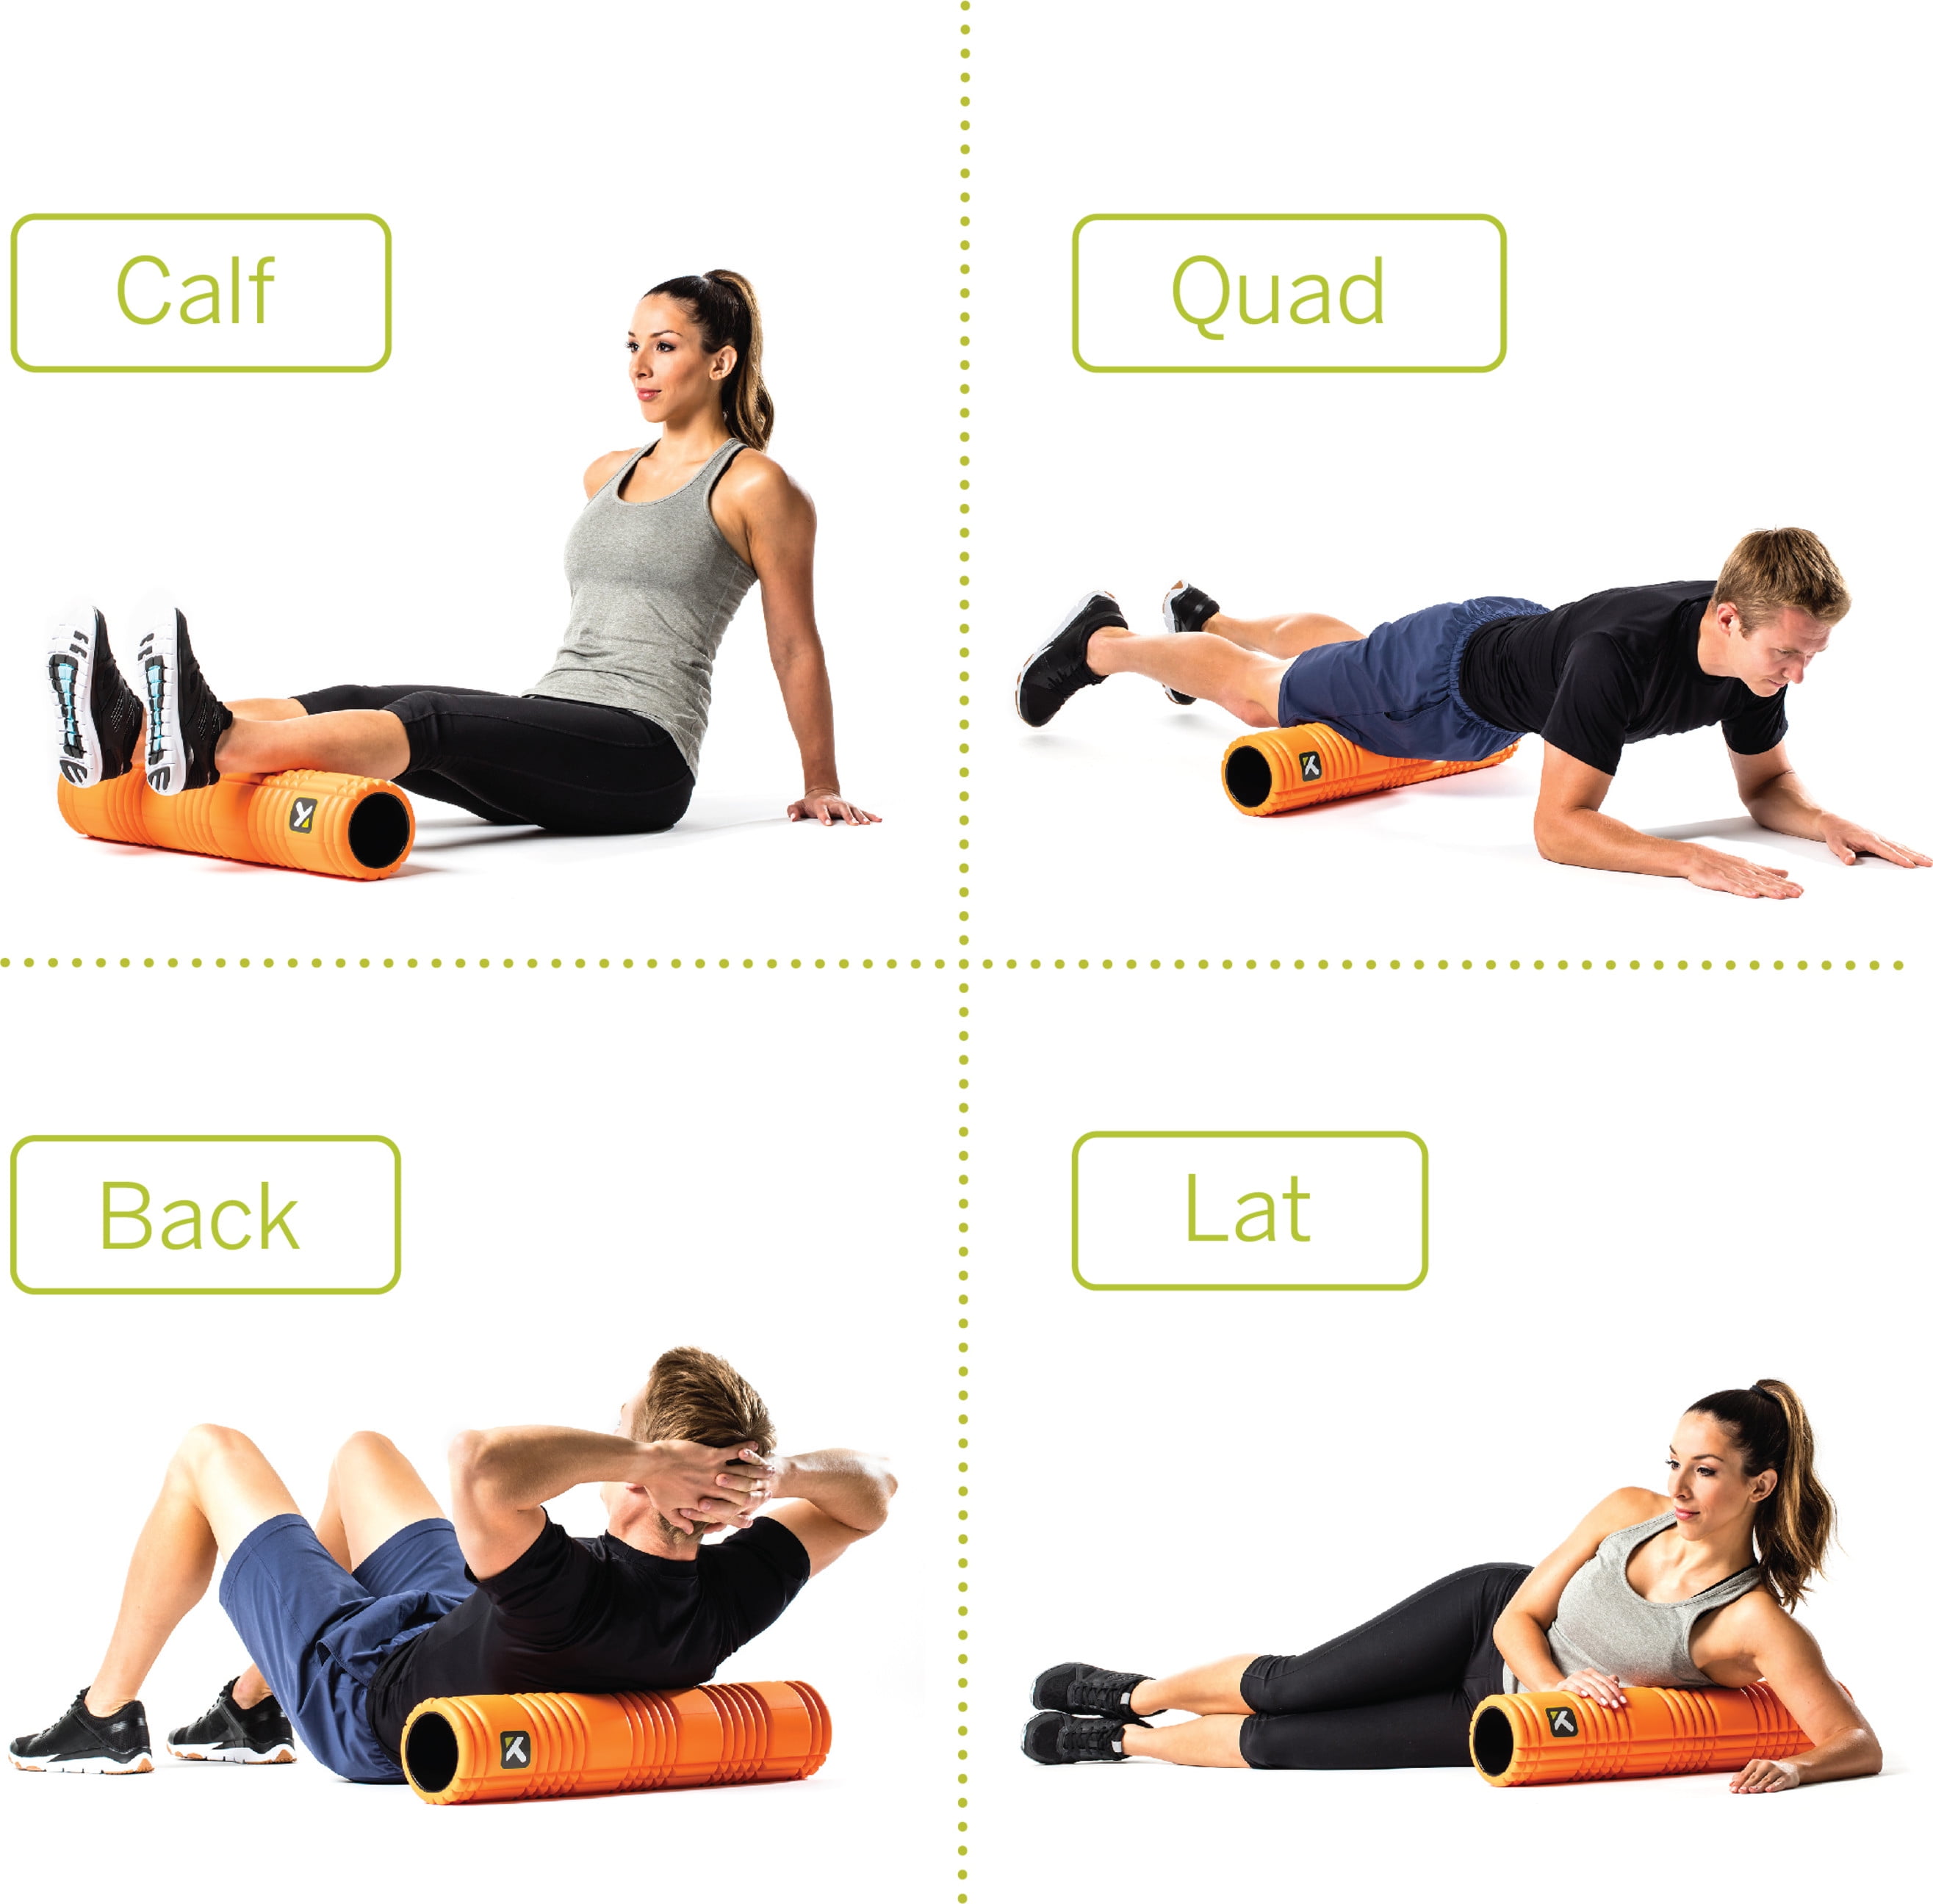 Delts Foam Roller Exercises! Say Goodbye to Back Pain – Pulseroll